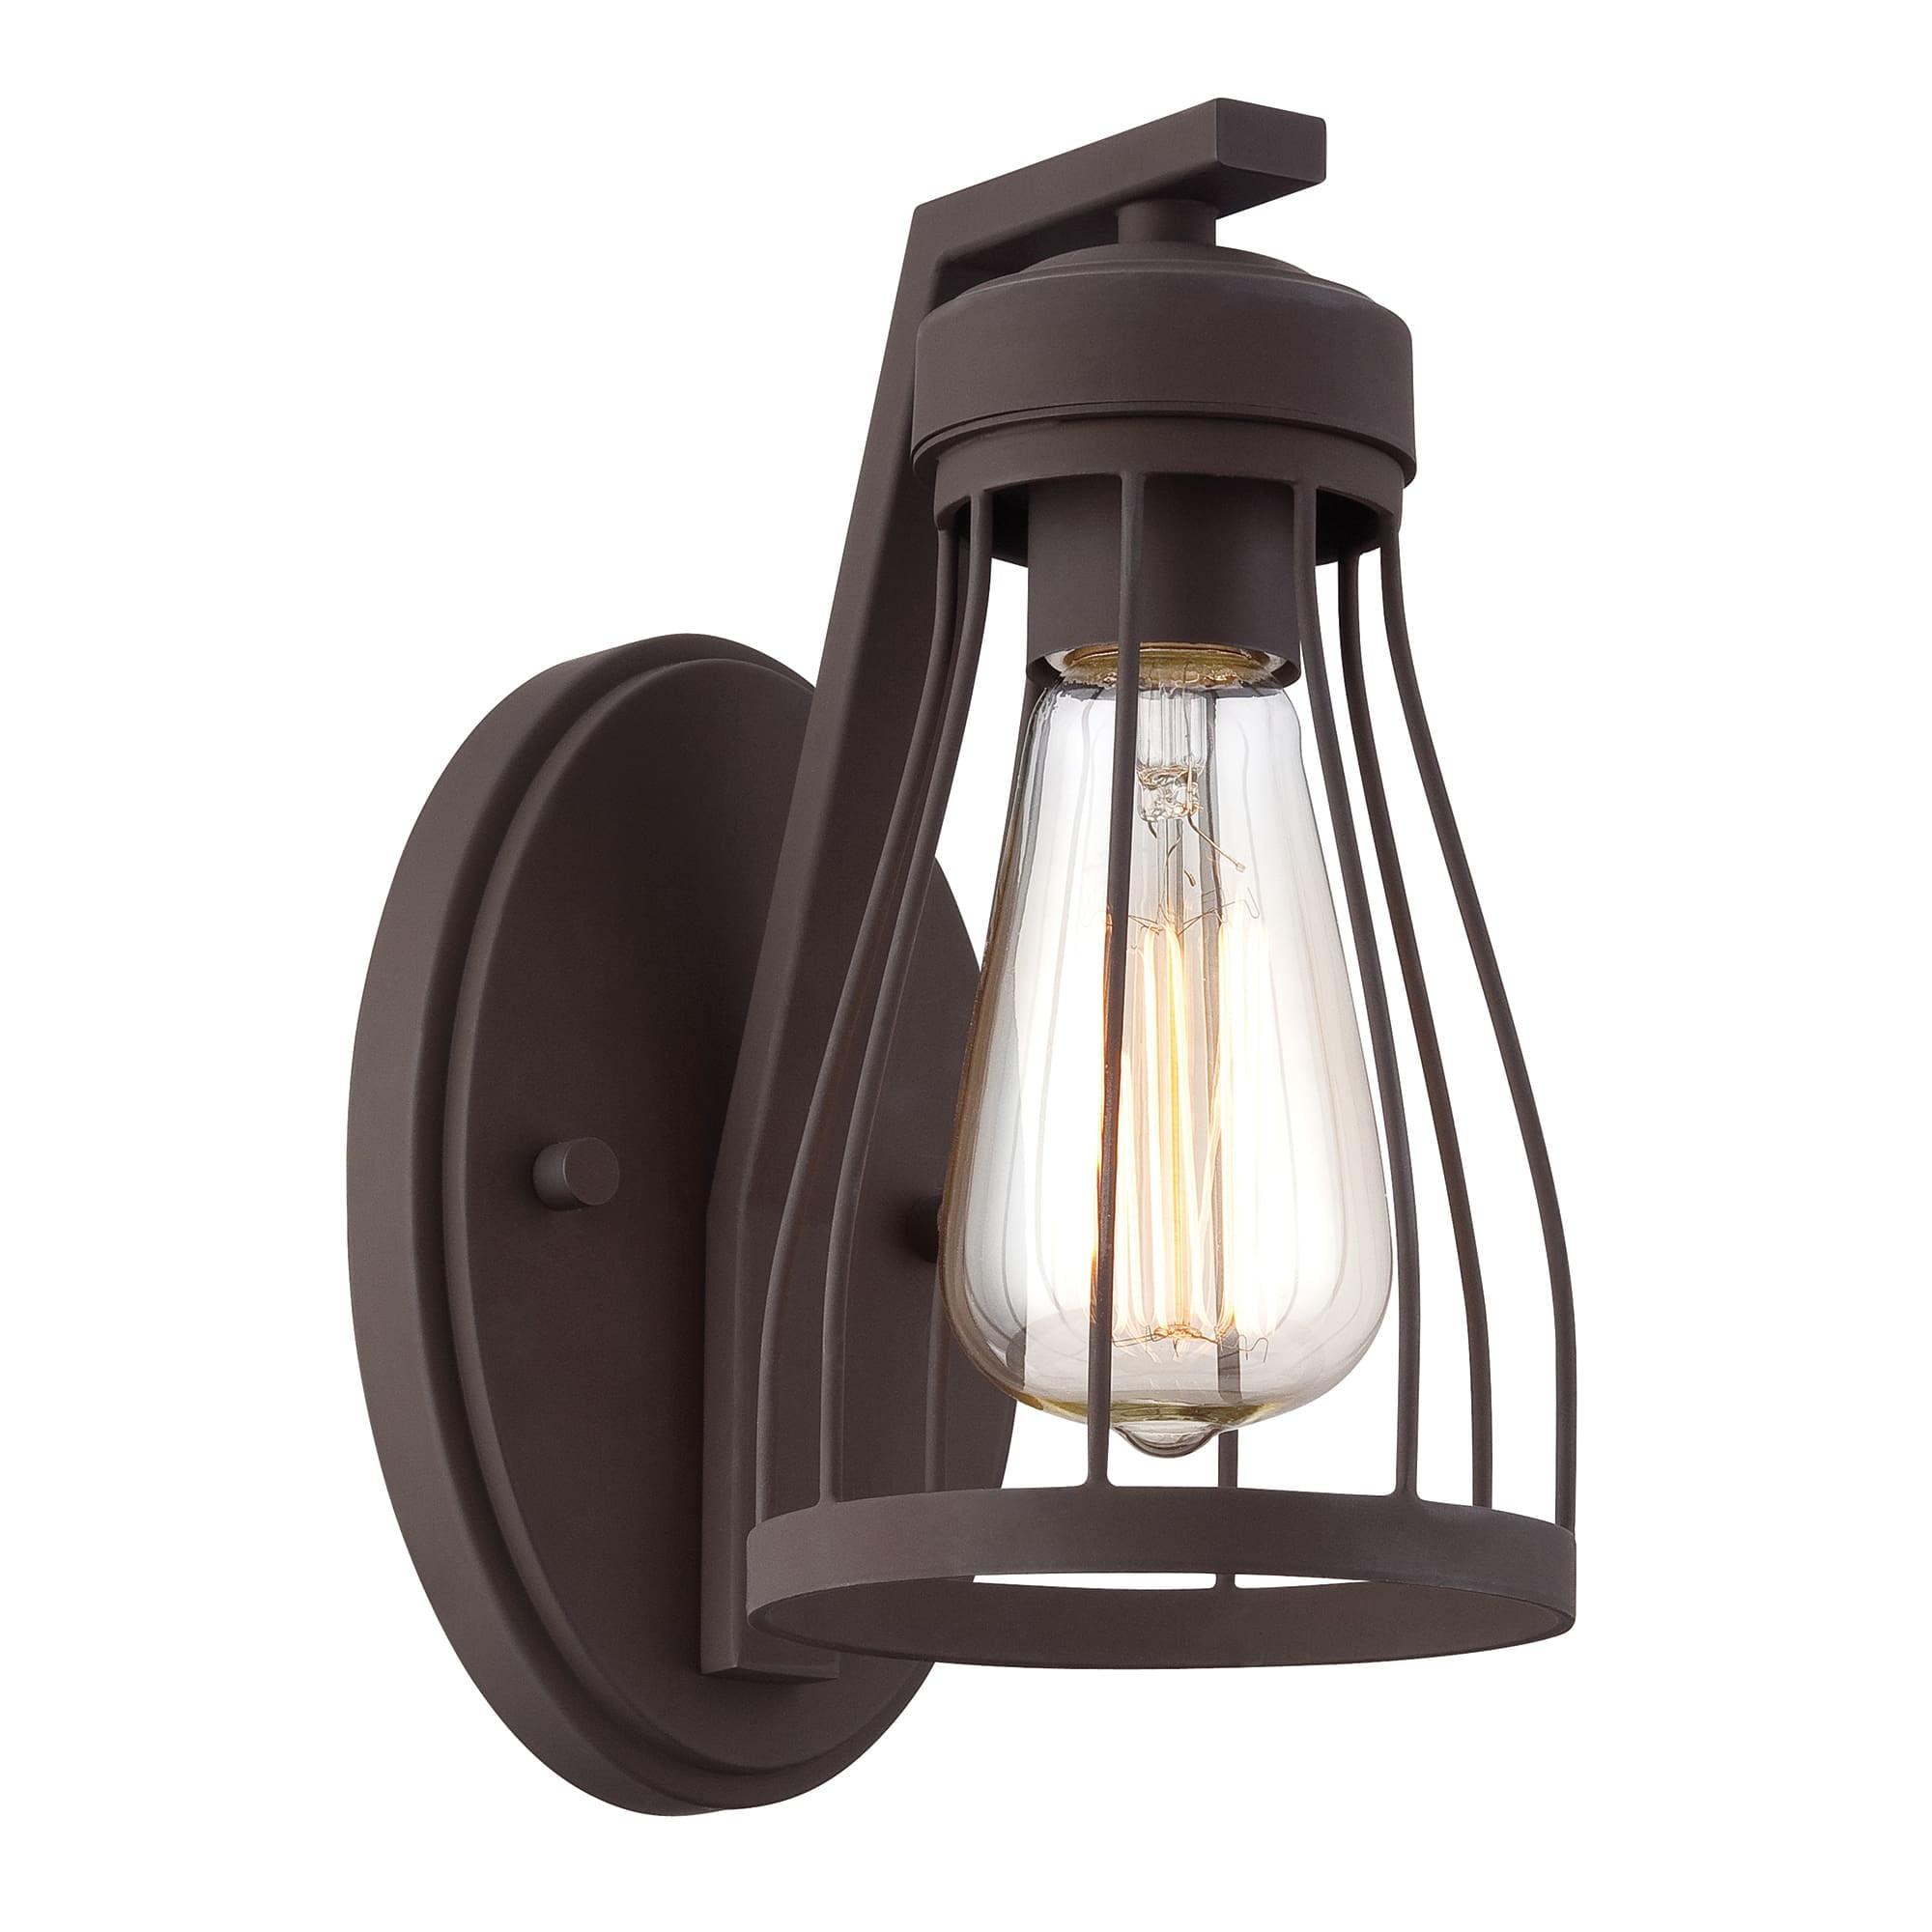 Brooklyn Rustic Bronze Caged Filament Wall Sconce